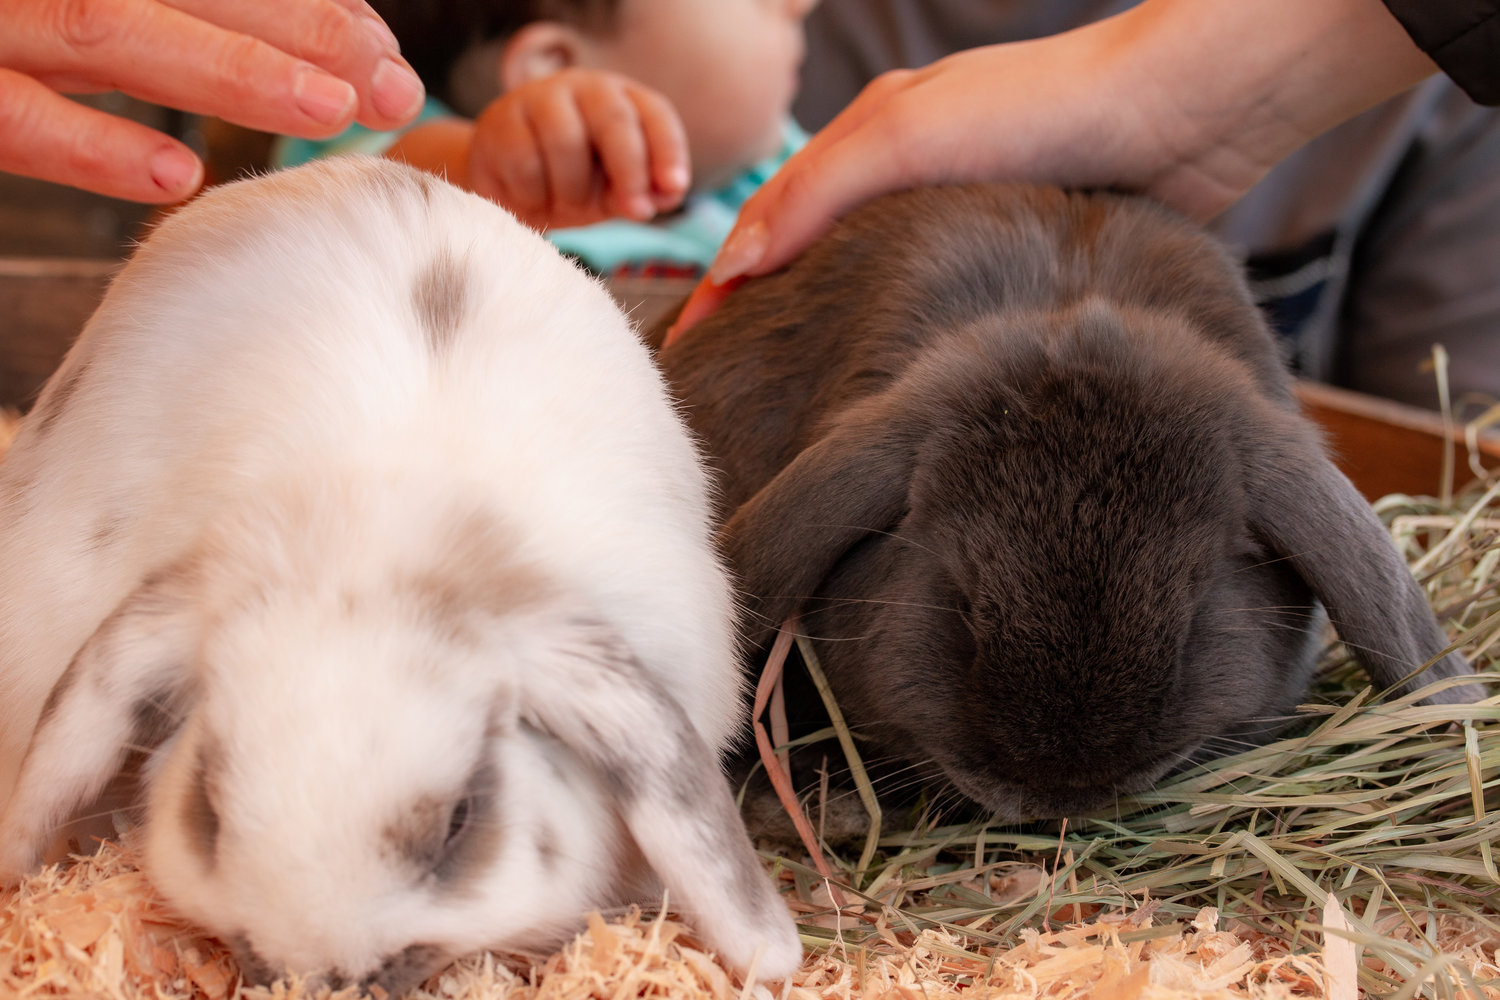 Hands on for these two soft bunnies, who aren’t bothered one bit as they munch away while at the petting zoo at the Centralia College SpringFest Tuesday afternoon.